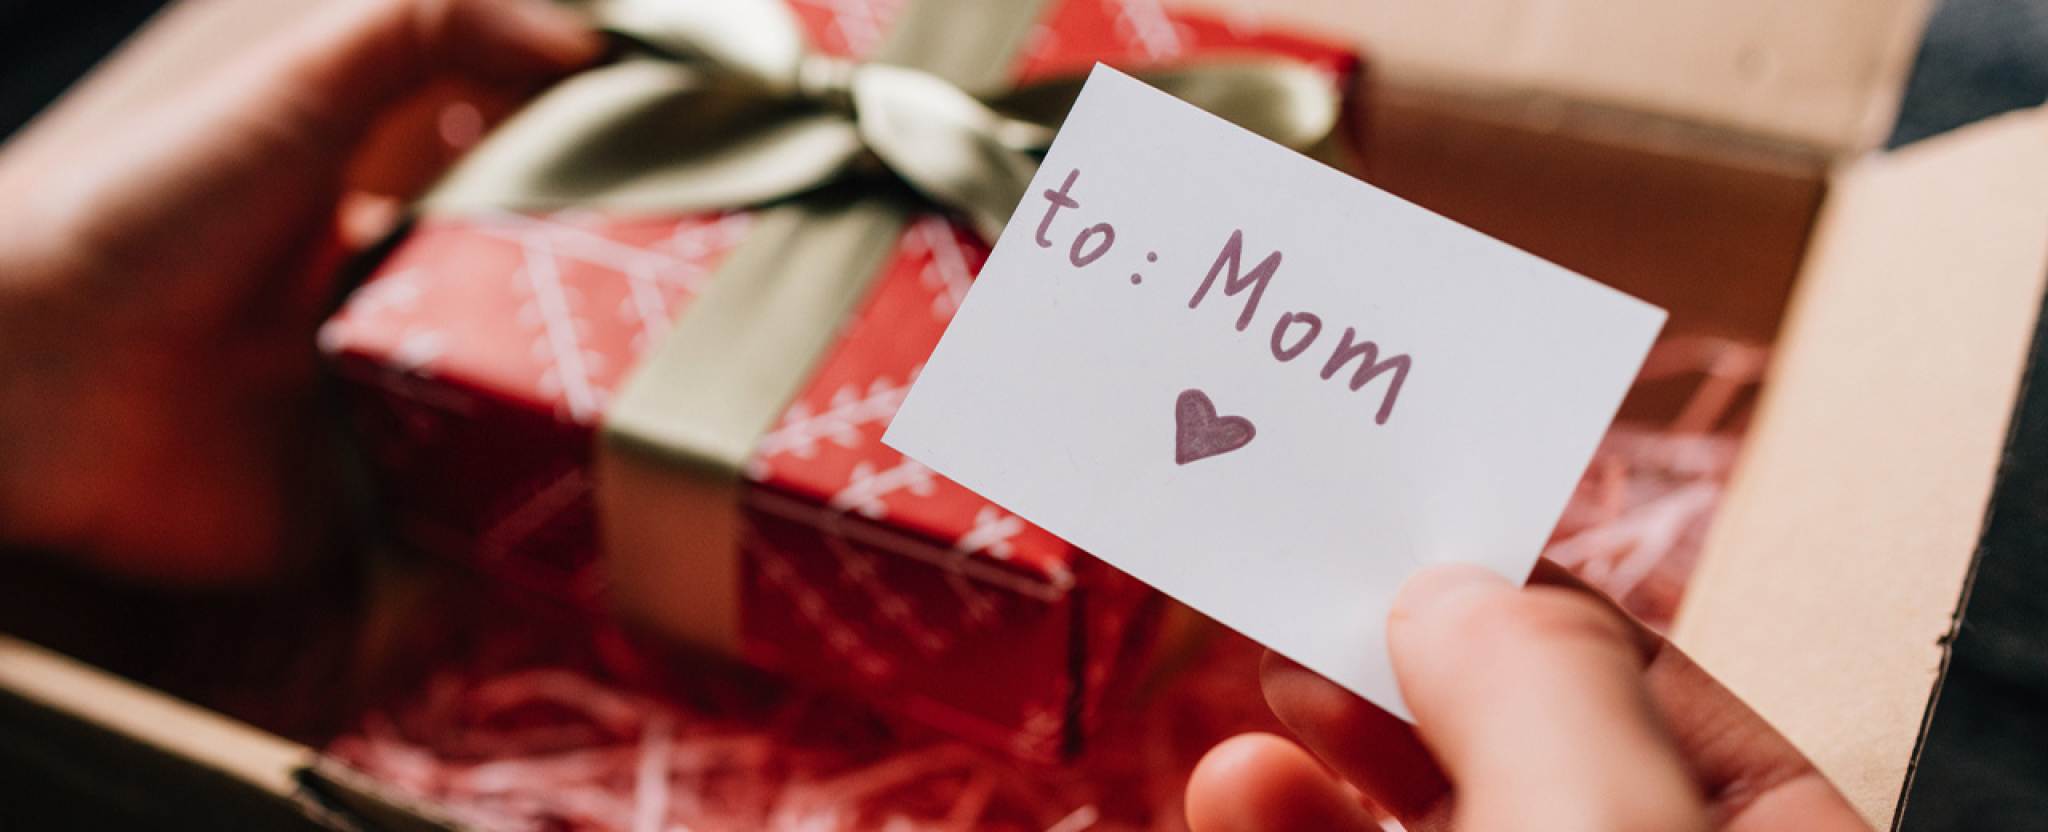 Hands open a shipping box which contains a wrapped gift box and a card that reads 'to Mom.’